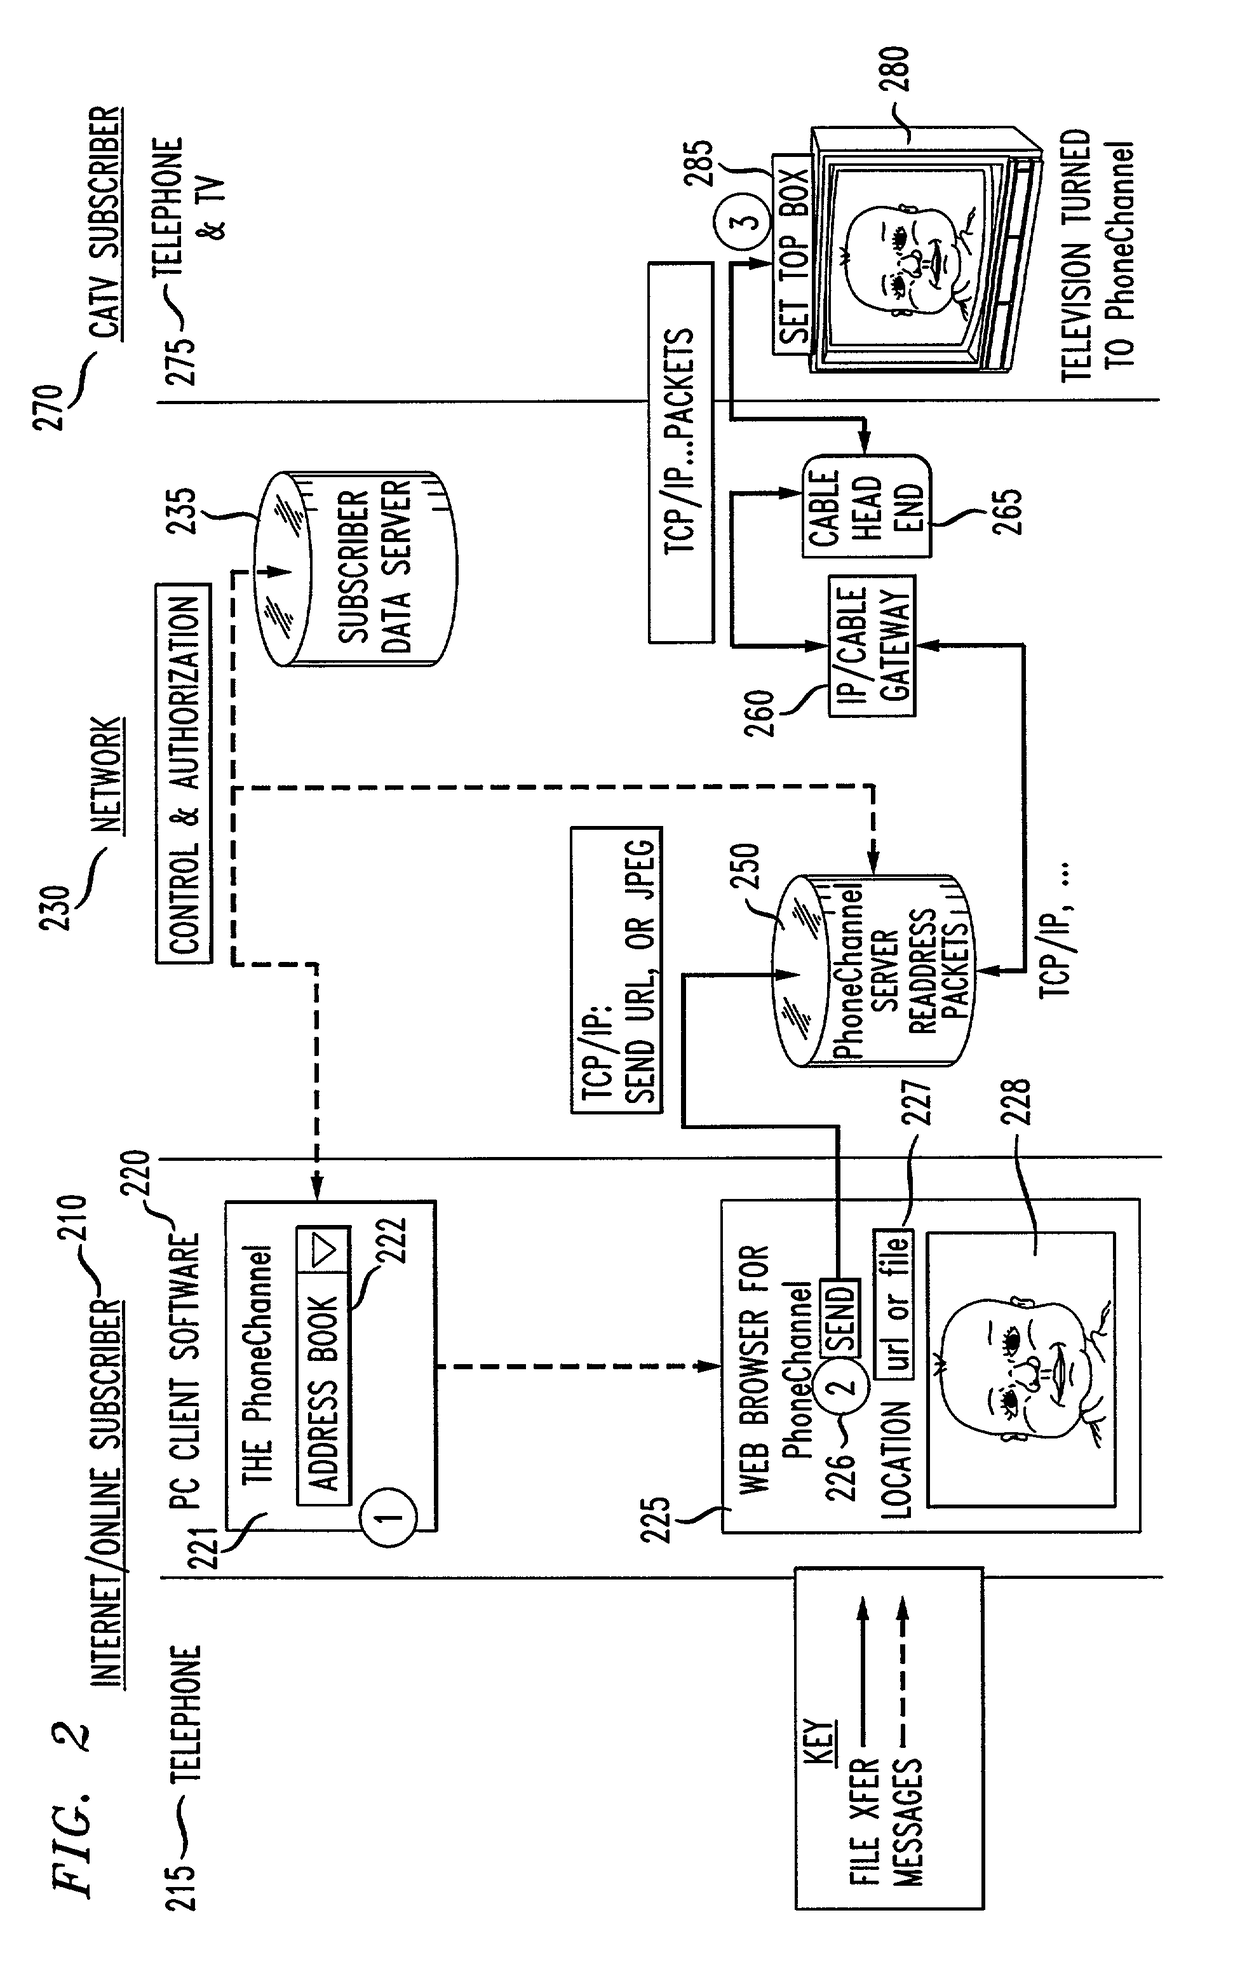 Method and apparatus for internet co-browsing over cable television and controlled through computer telephony